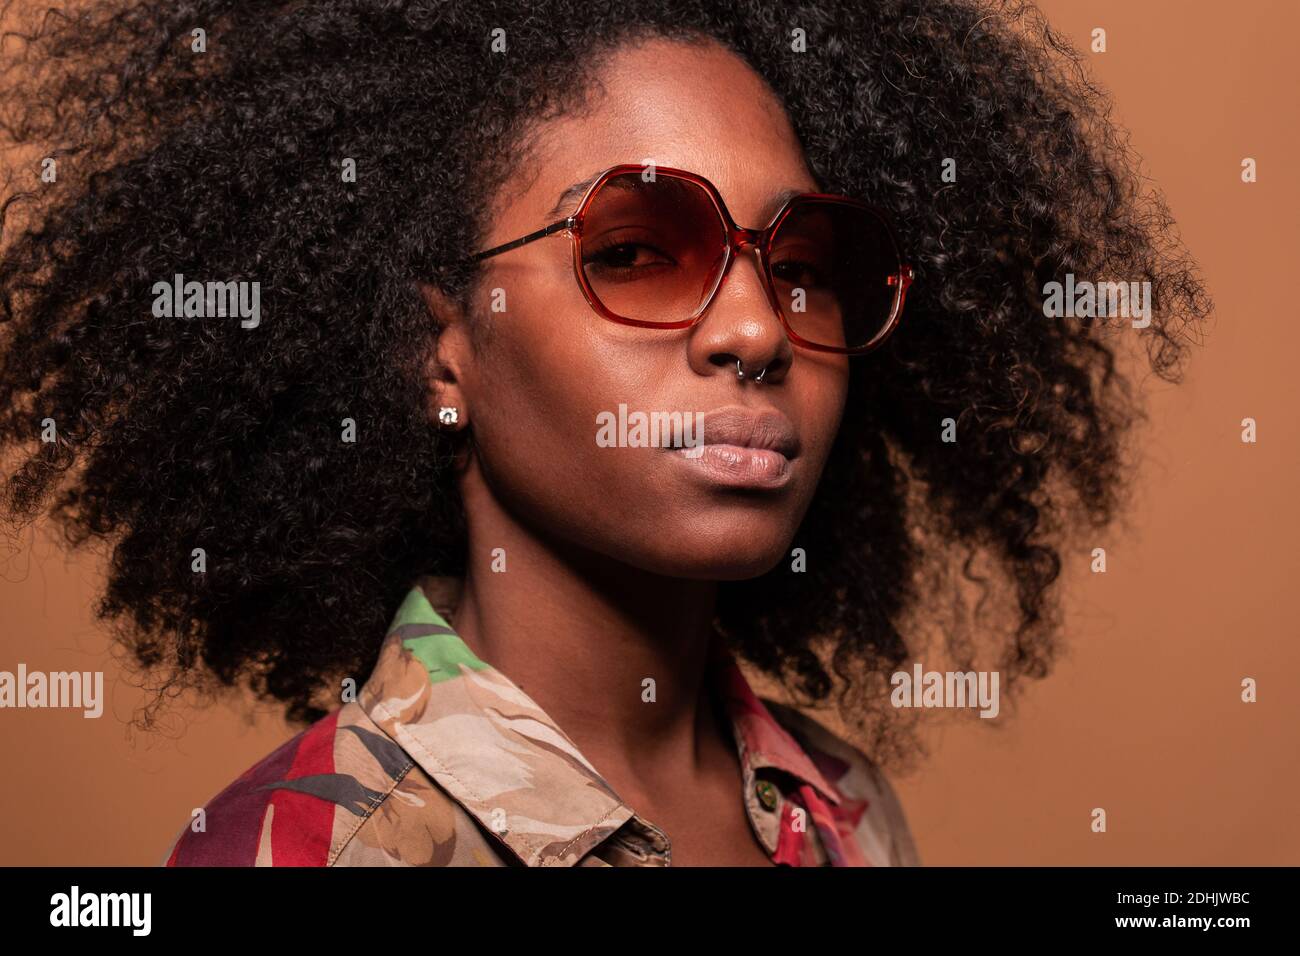 Confident Cuban Woman with Afro hairstyle wearing sunglasses with floral shirt looking at camera Stock Photo